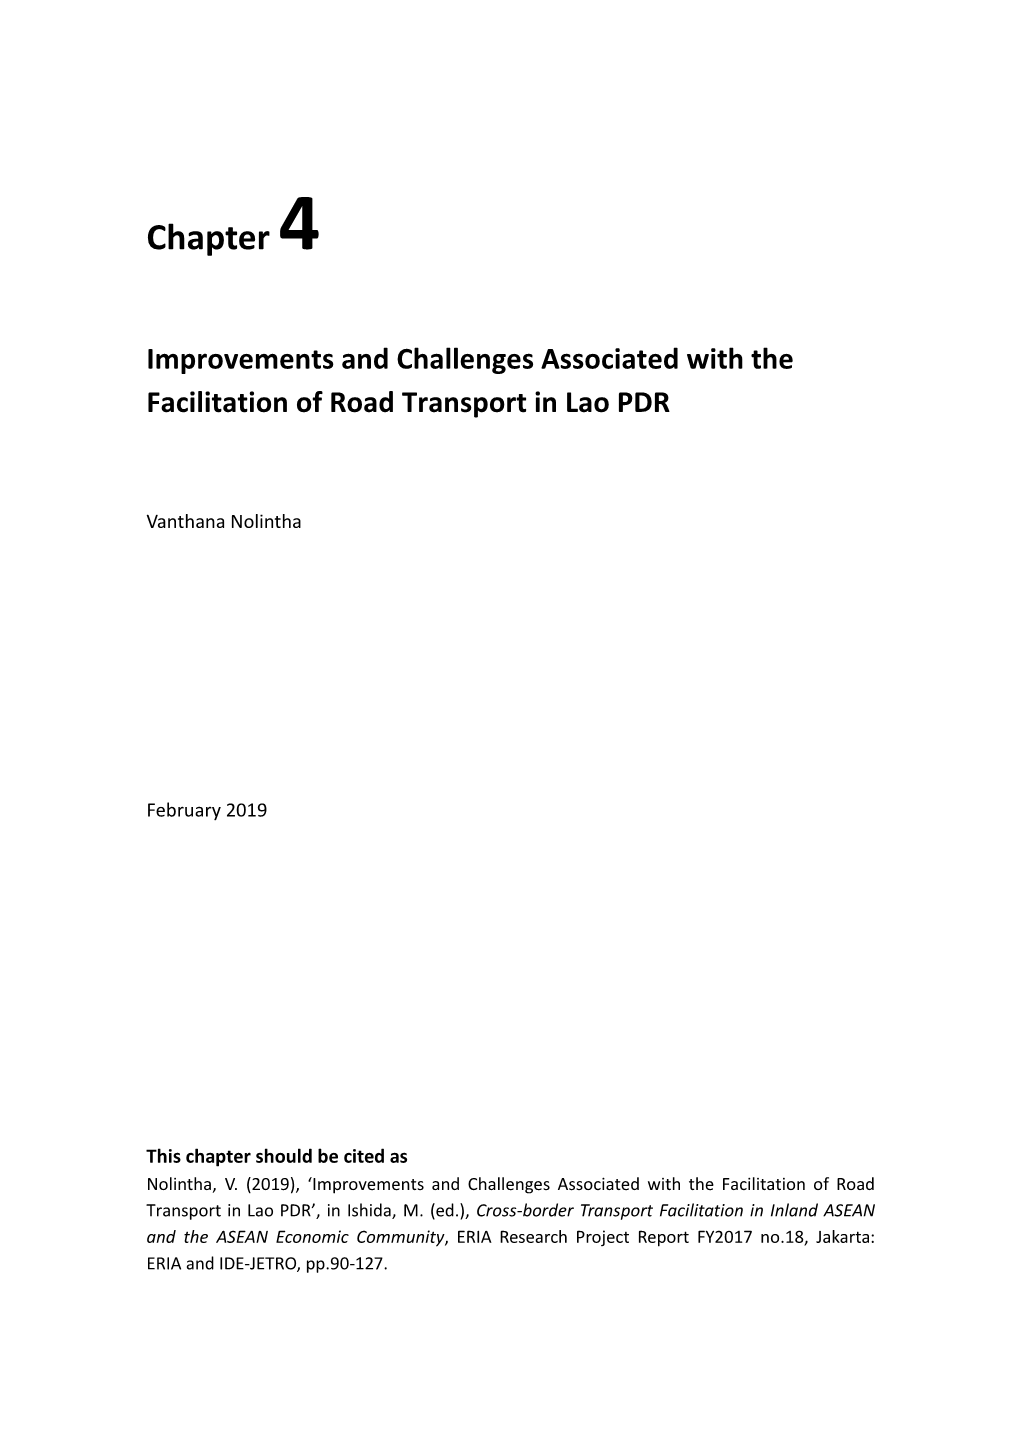 Improvements and Challenges Associated with the Facilitation of Road Transport in Lao PDR